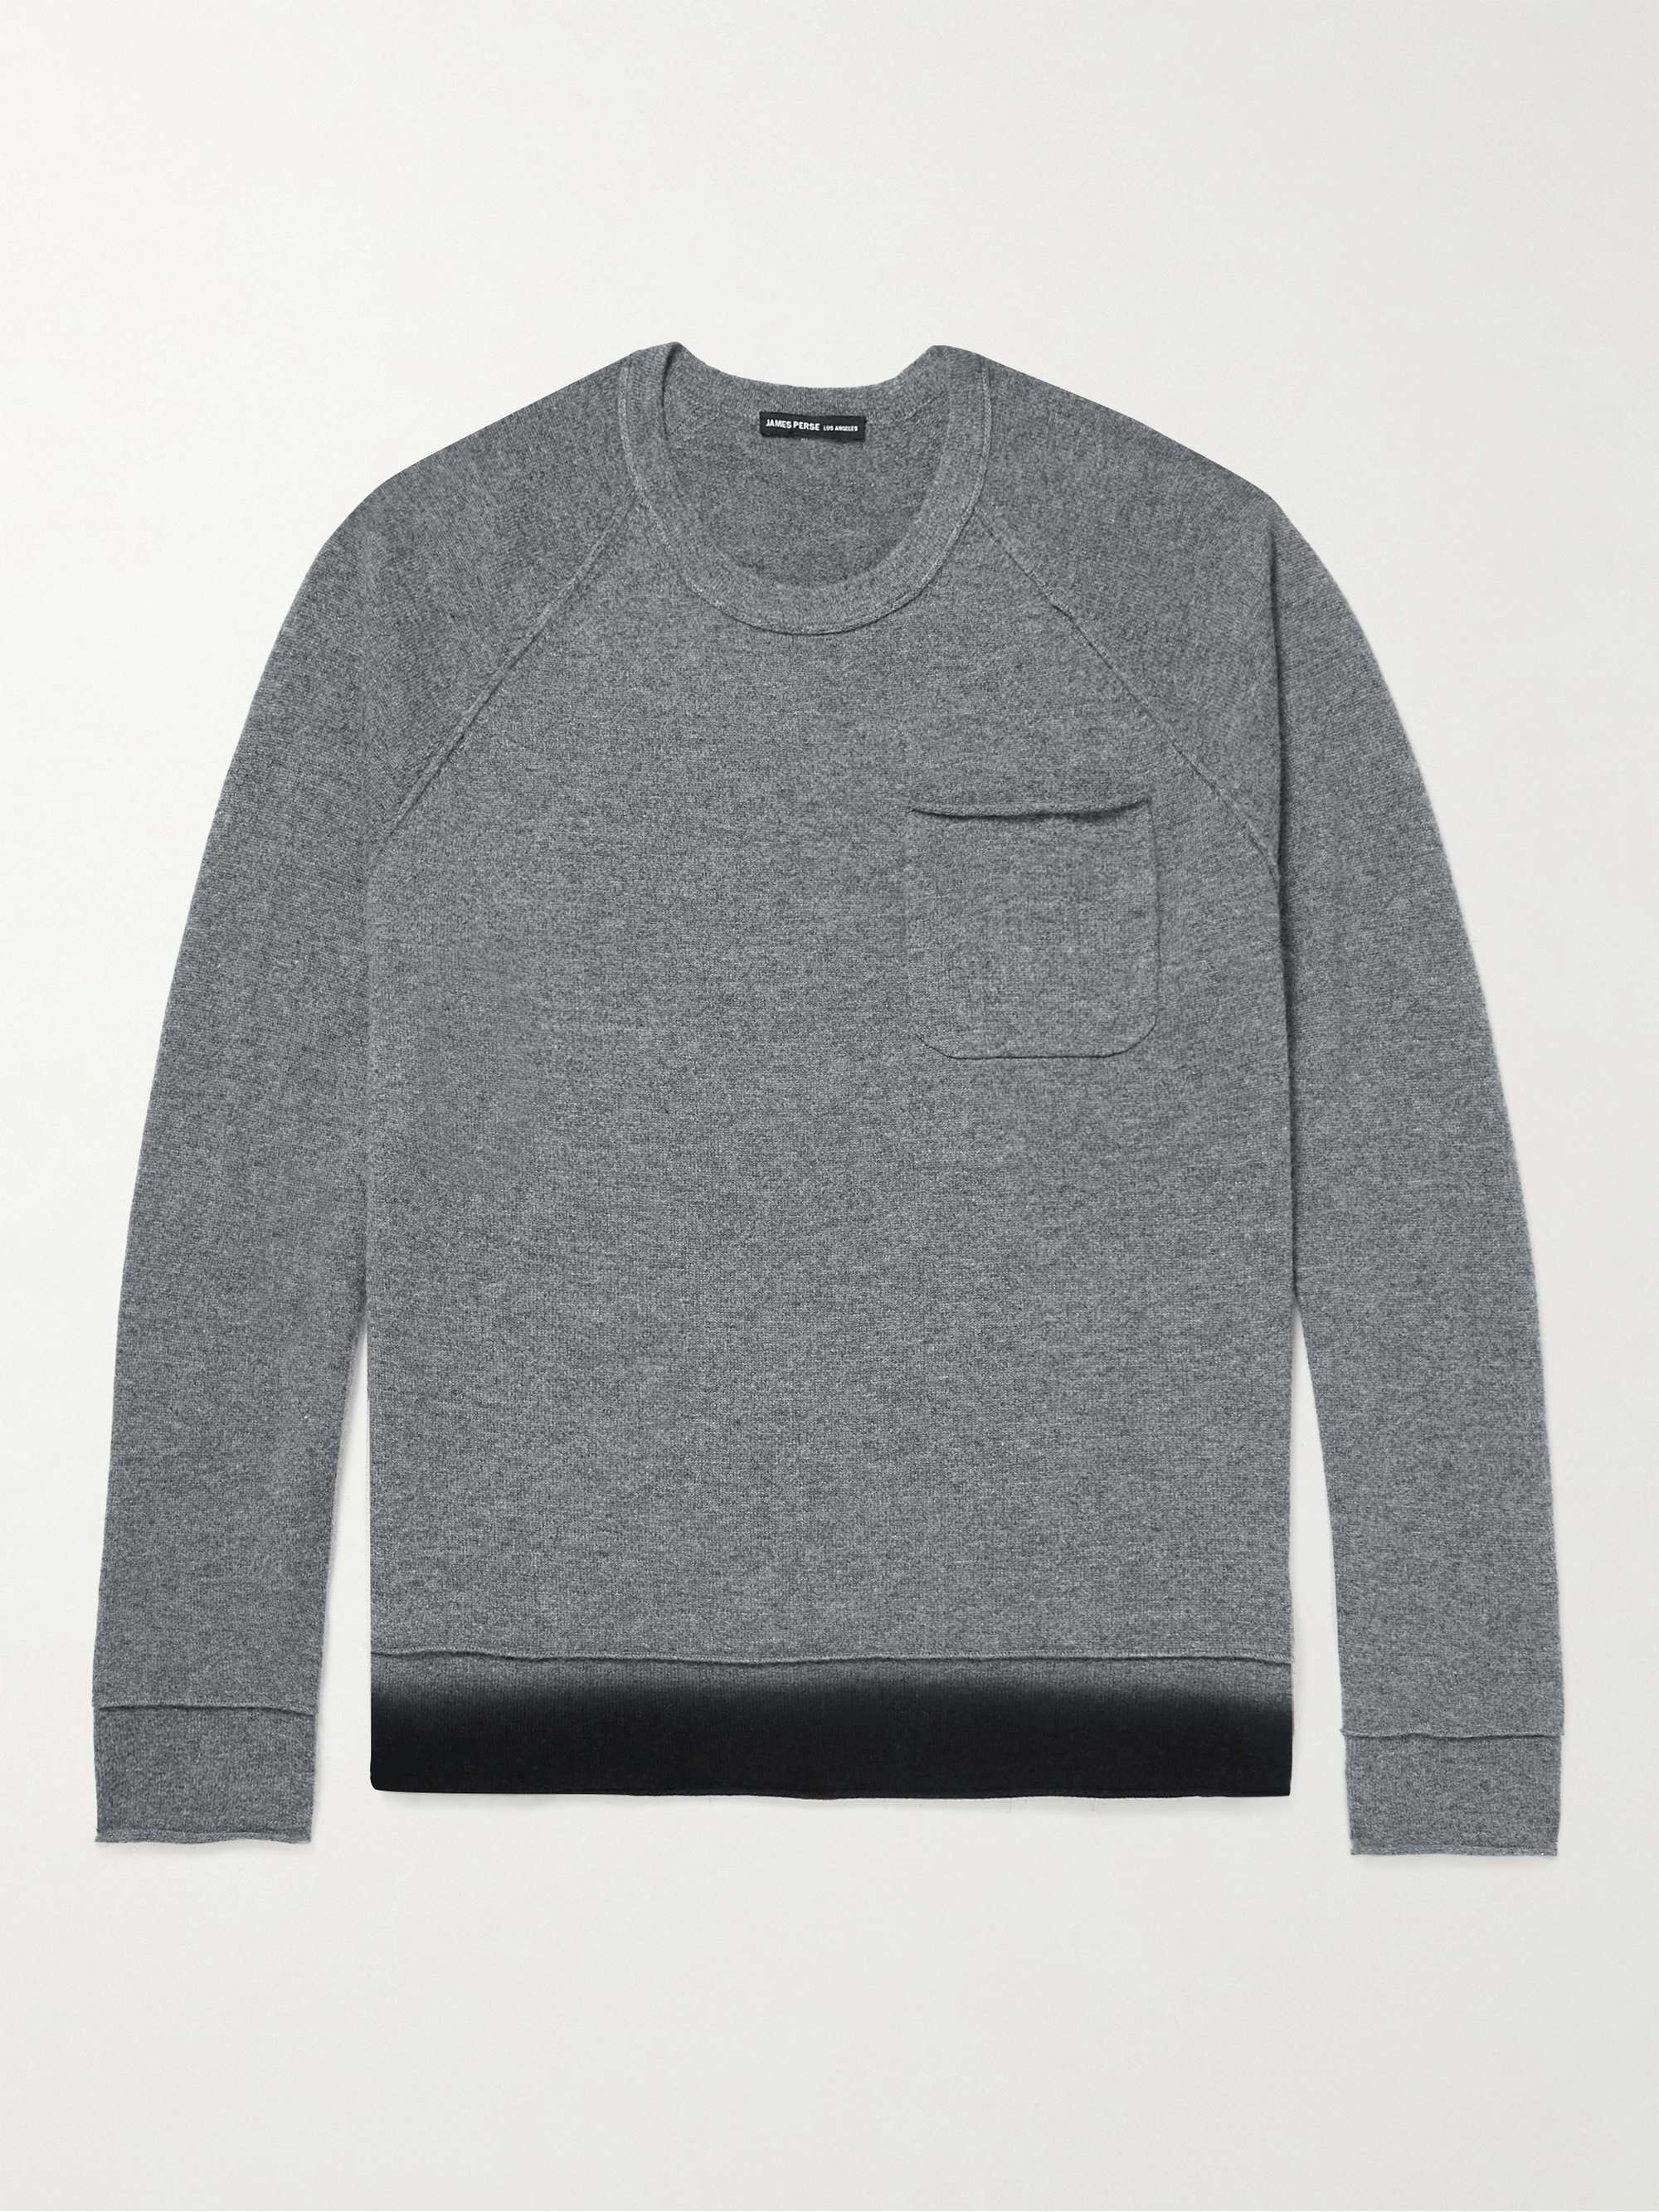 JAMES PERSE Dip-Dyed Cashmere Sweater